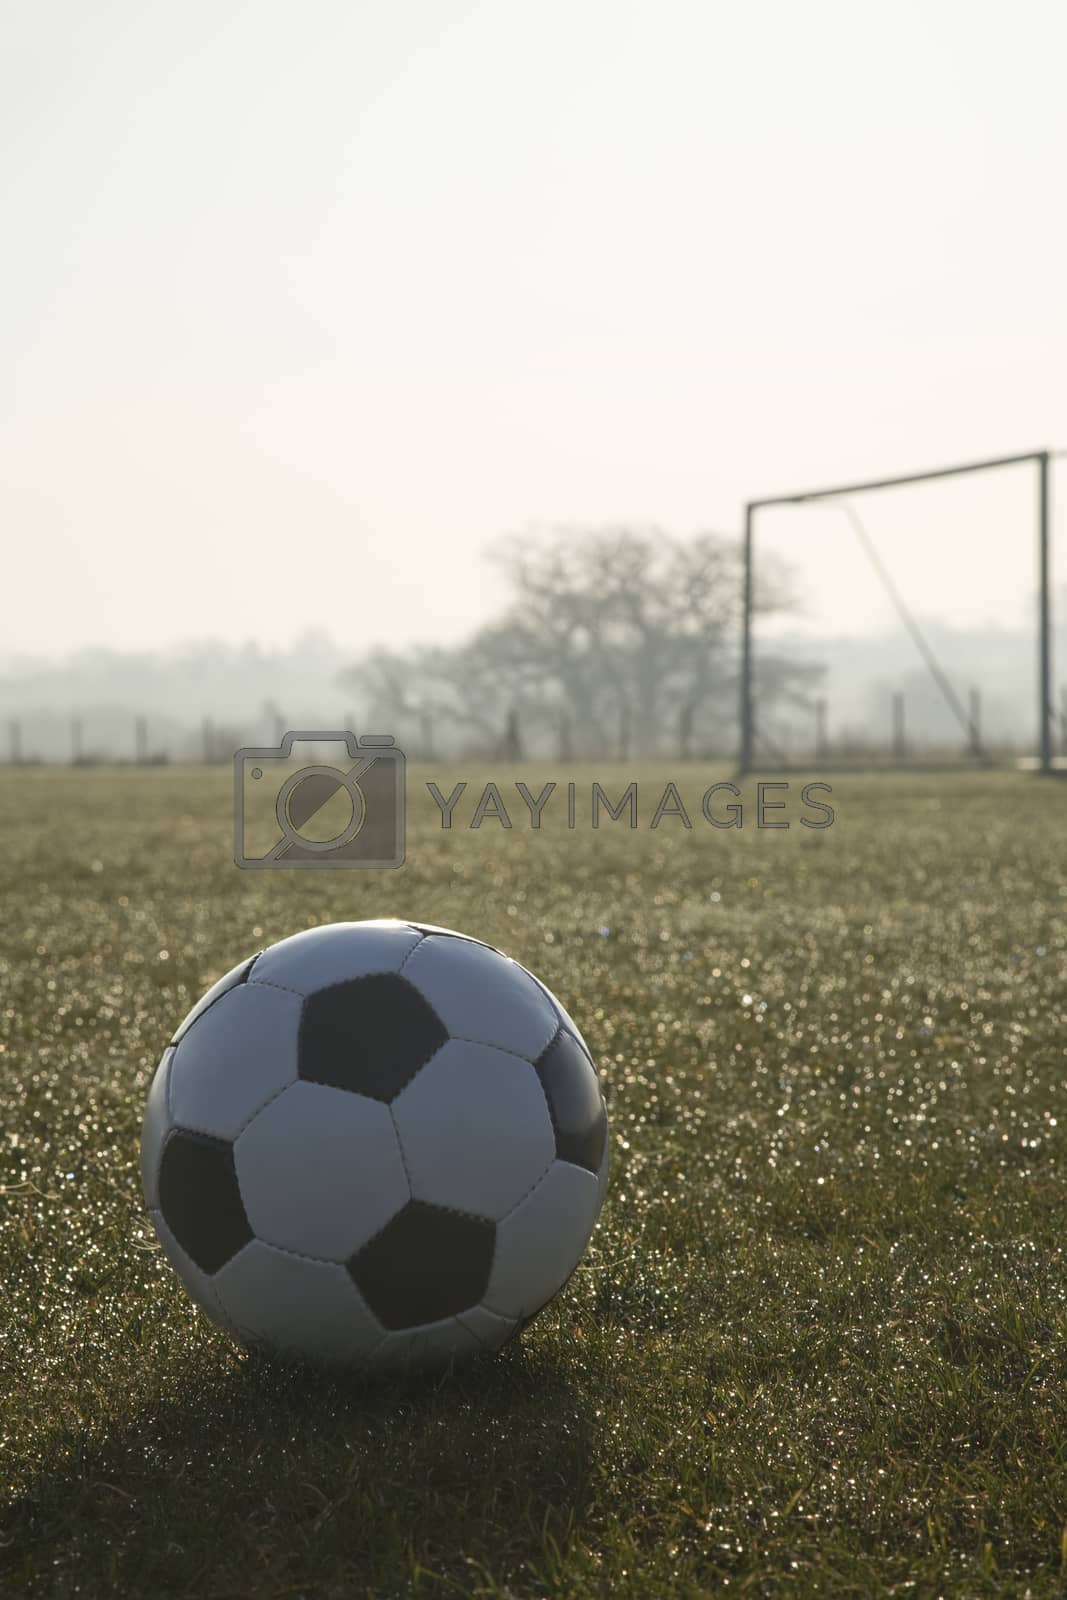 Royalty free image of black and white football on a empty football pitch,frosty winter by littlebloke